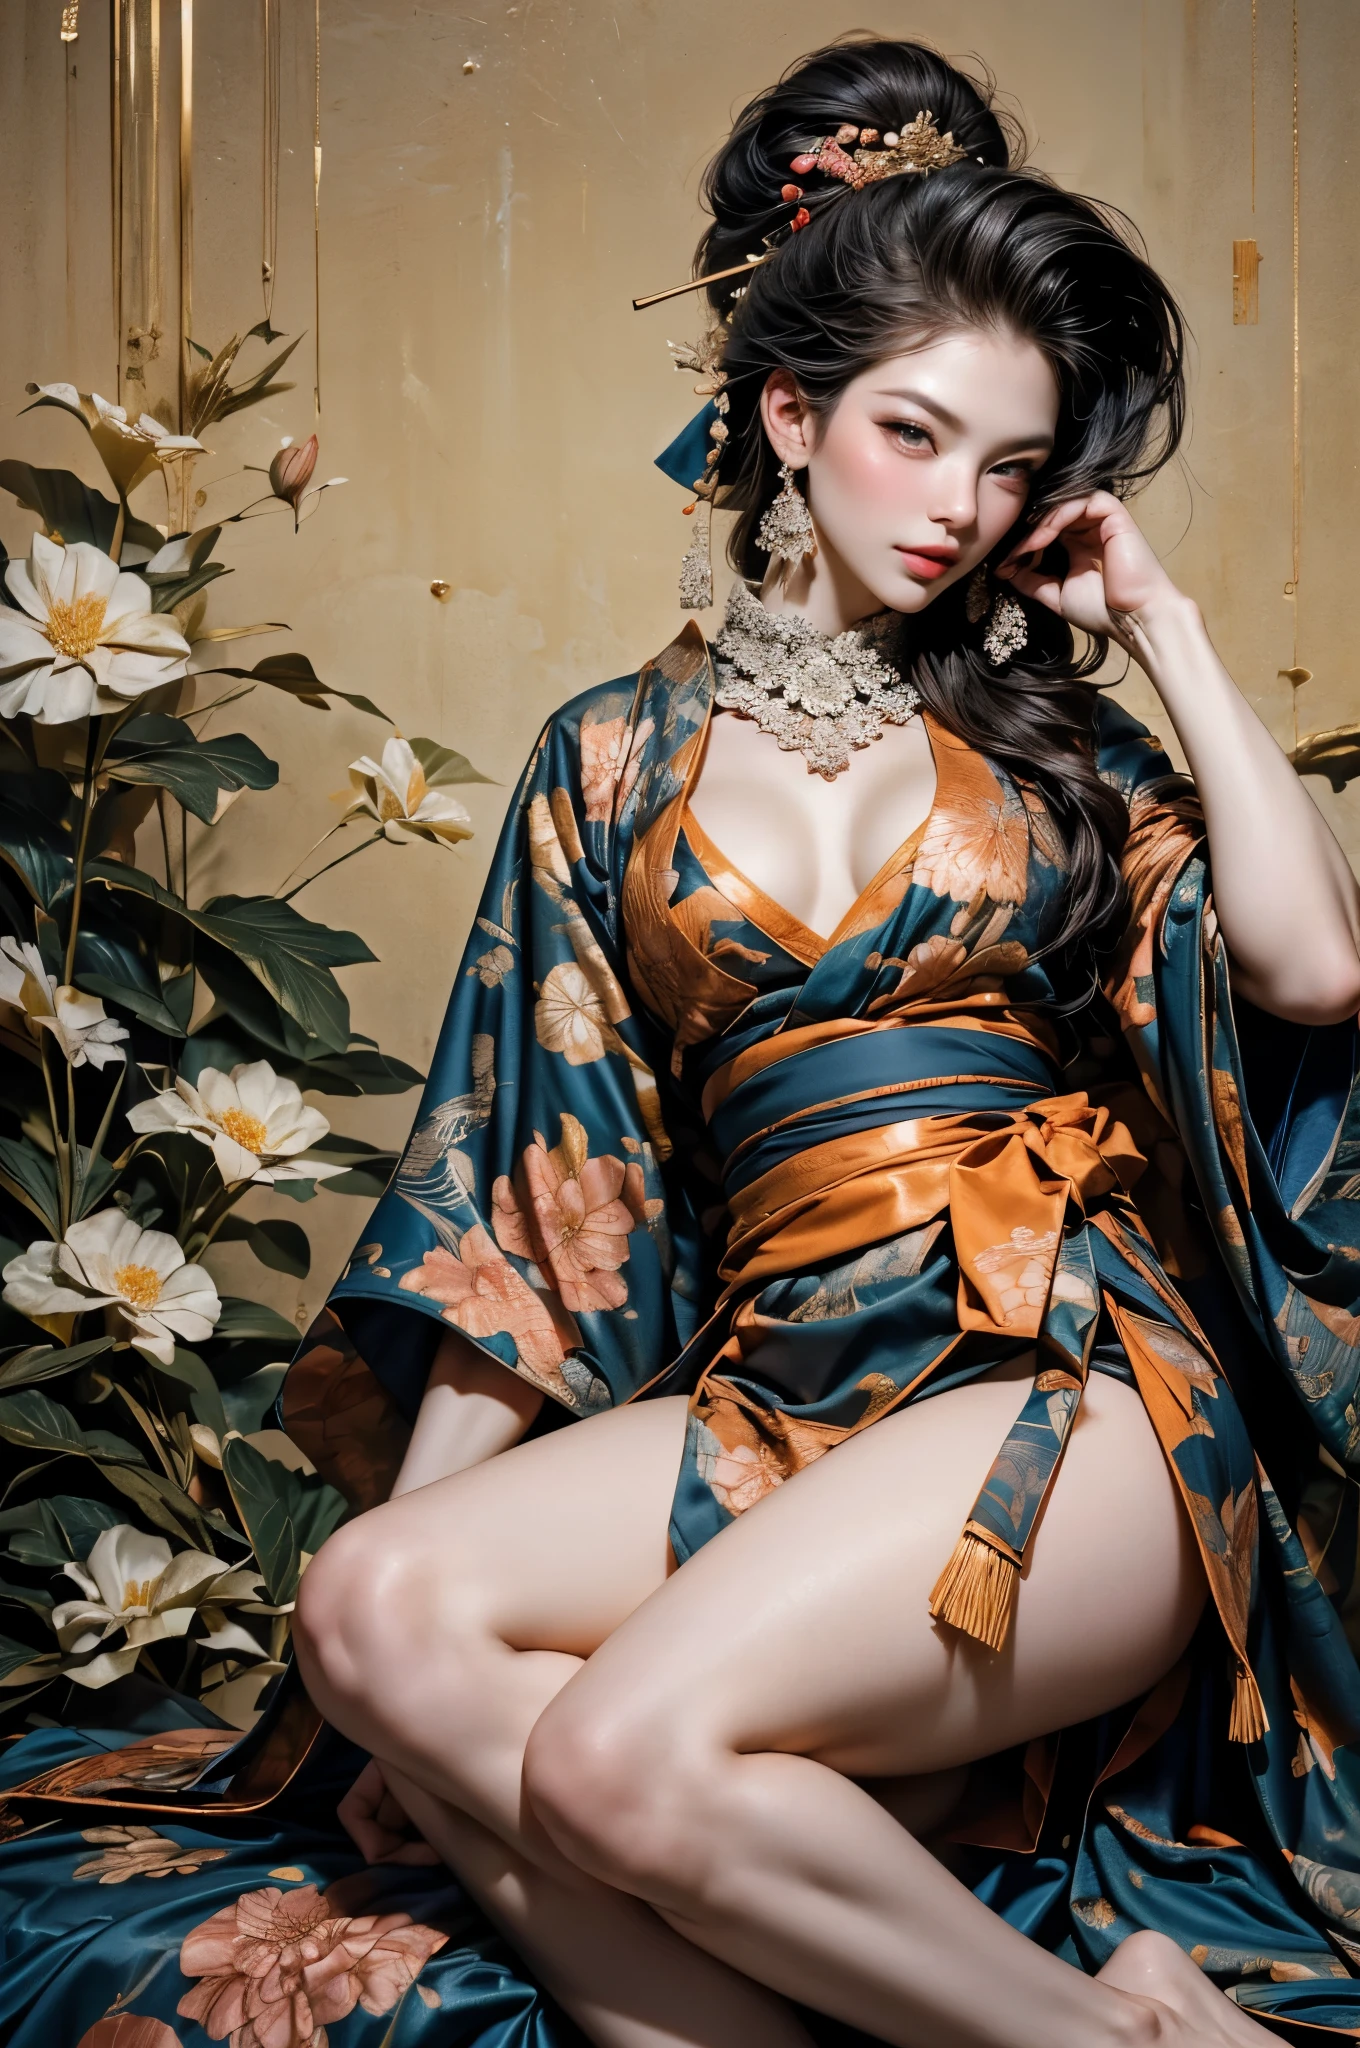 Wait warrior sexy, pretty face, Delicious Company, Alluring figure, Wearing a sexy open kimono. The artwork is created in a medium reminiscent of Japanese ink paintings....., Features bold brushstrokes and a Monochromatic color palette. Artist&#39;Masterful technique reveals the intensity and power of the image&#39;sense of presence，with the highest quality, Perfectly capture every detail with ultra-high resolution. Textures and intricate patterns on kimonos are rendered with extreme precision. Lighting is carefully designed，Enhance drama, Features deep shadows and subtle highlights. general, The artwork exudes elegance and power, Combining traditional Japanese aesthetics with a modern feel. Monochromatic color palette, Combine details, Create captivating and immersive experiences for your audience.